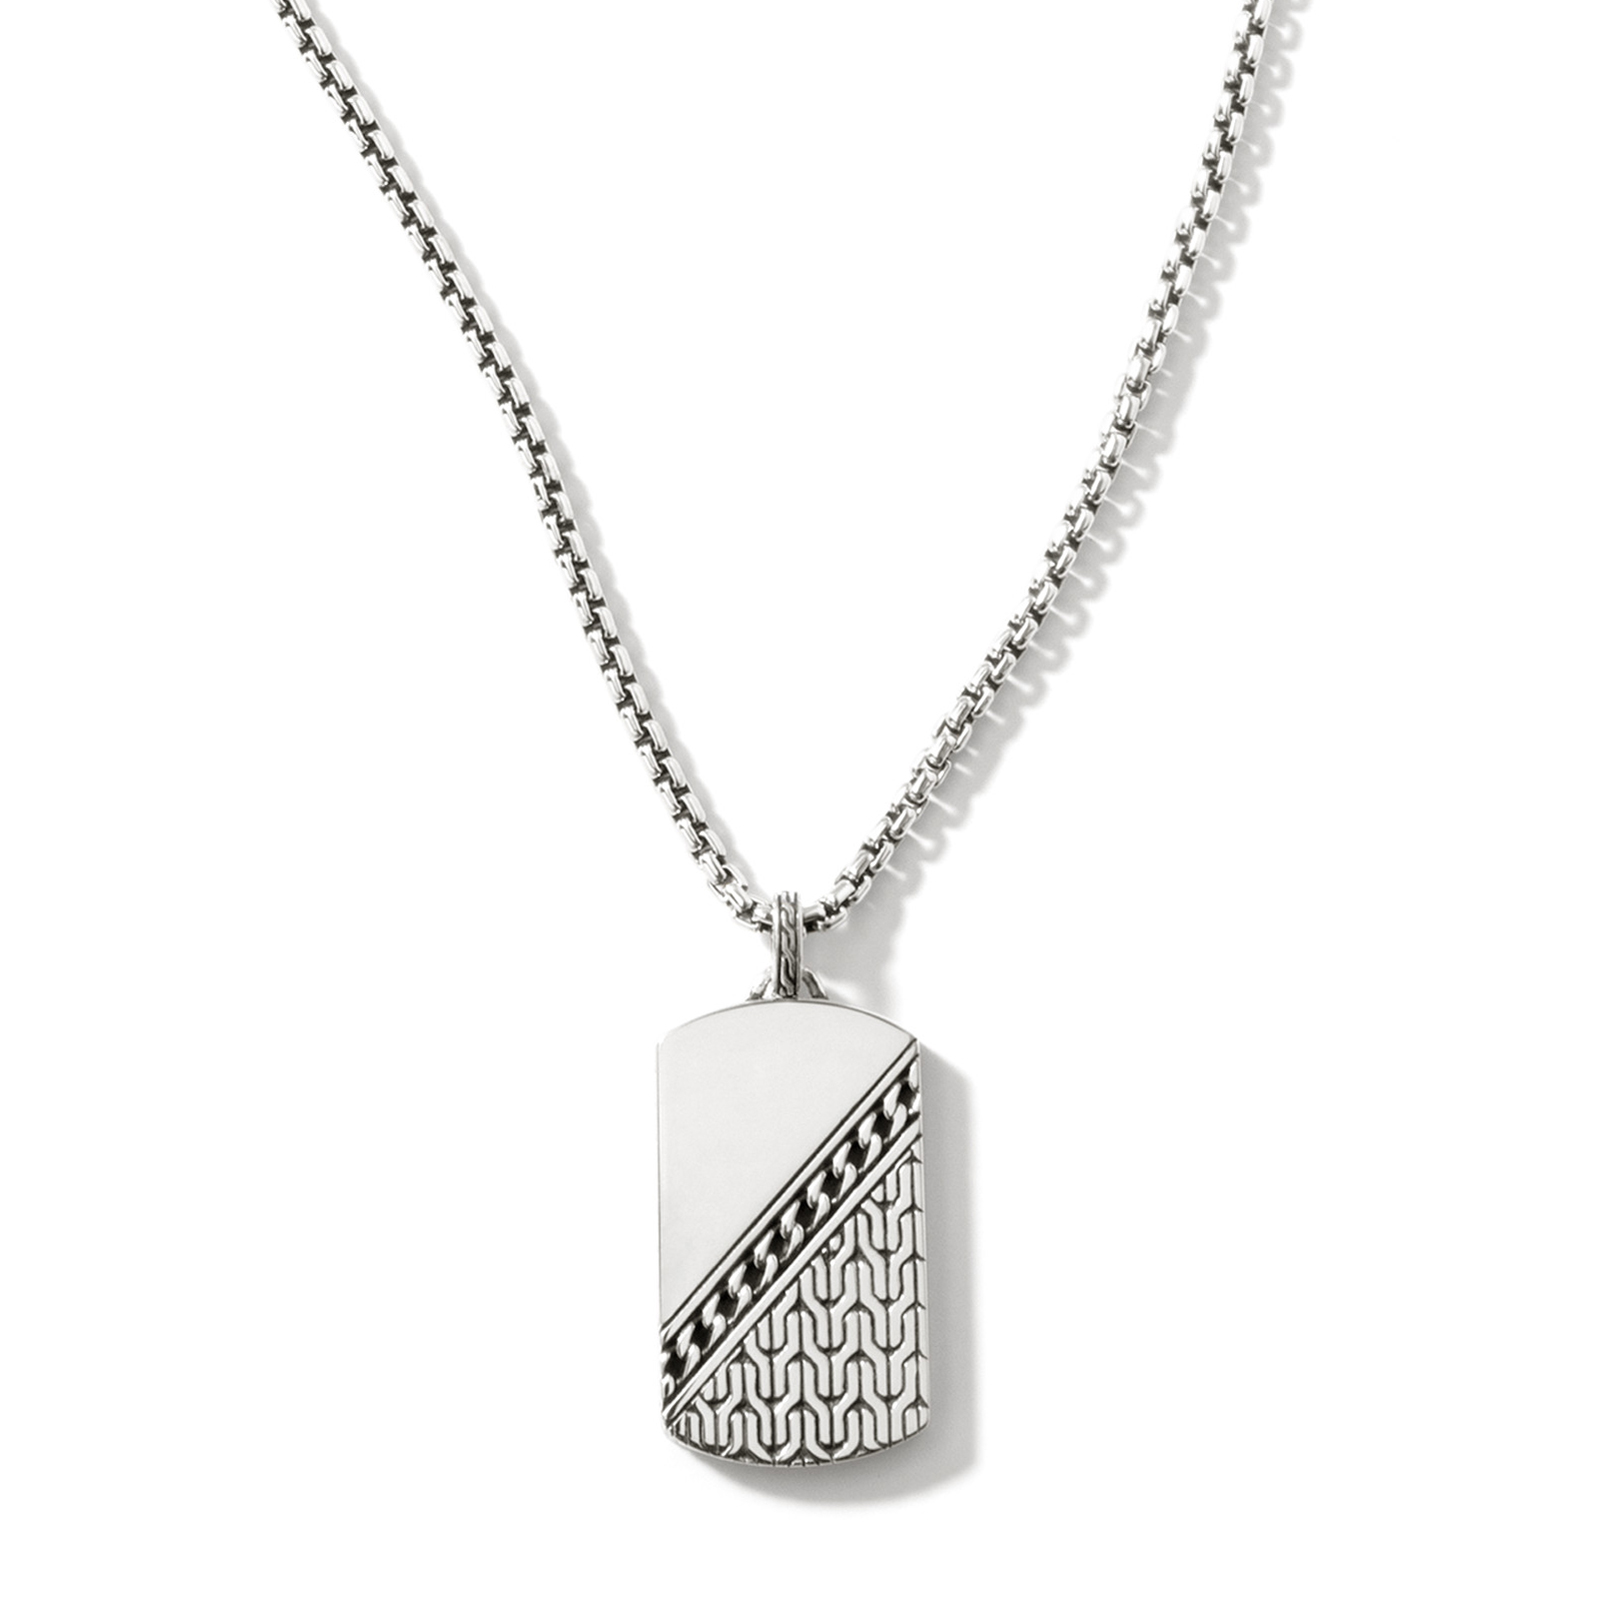 Berkeley Dog Tag by John Hardy with Box Chain - Image 4